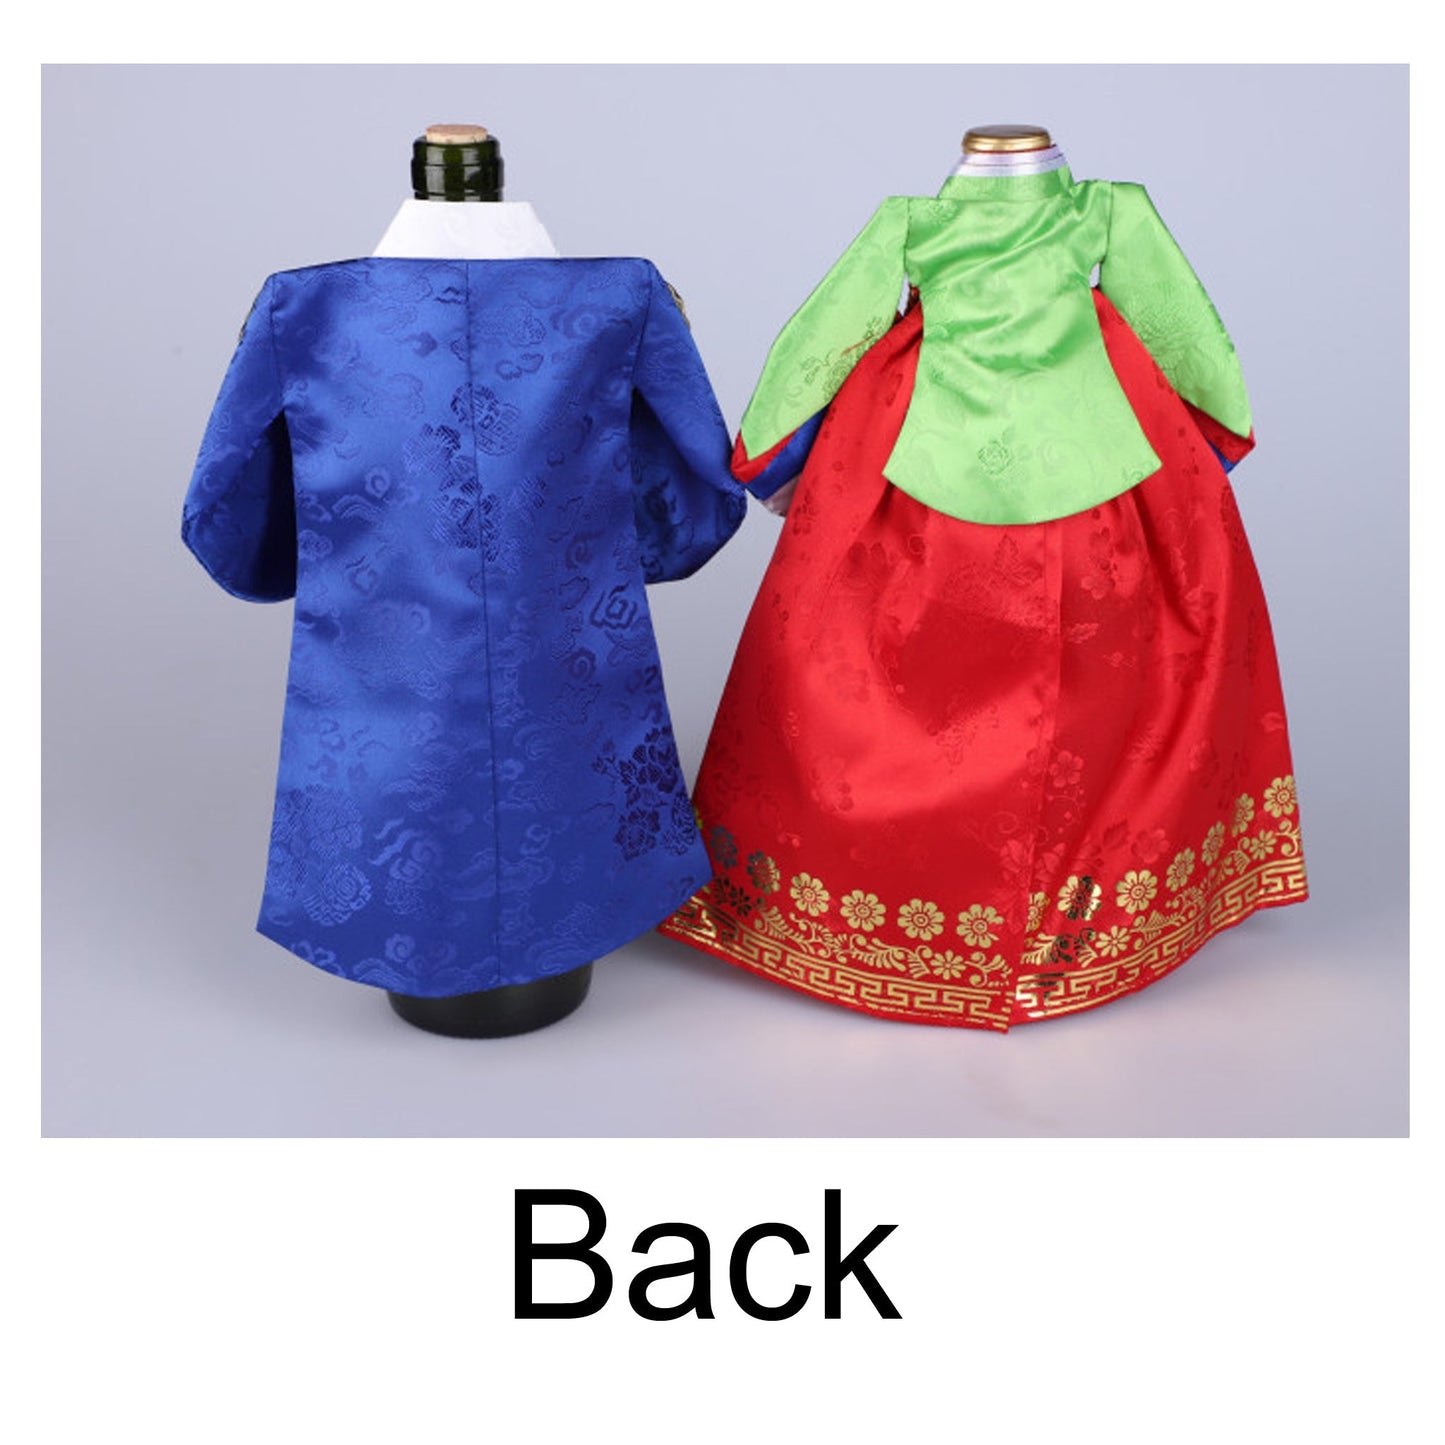 Bottle Cover, Wine Cover, Woman Hanbok Design, Korean Traditional Cloth Design, Pink and Purple Color